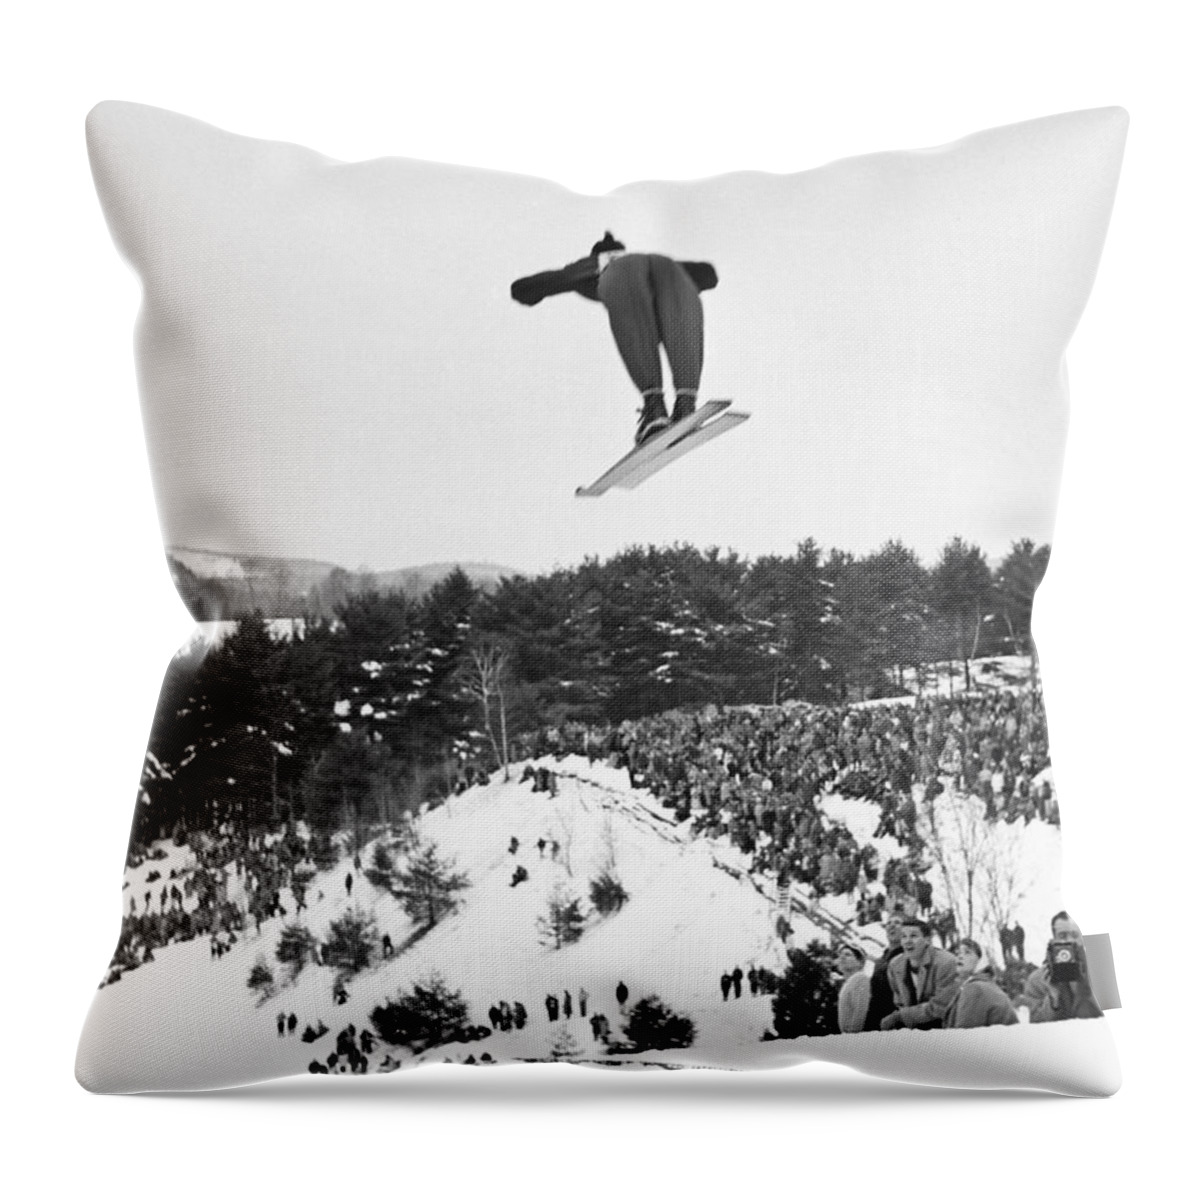 1950's Throw Pillow featuring the photograph Dartmouth Carnival Ski Jumper by Underwood Archives